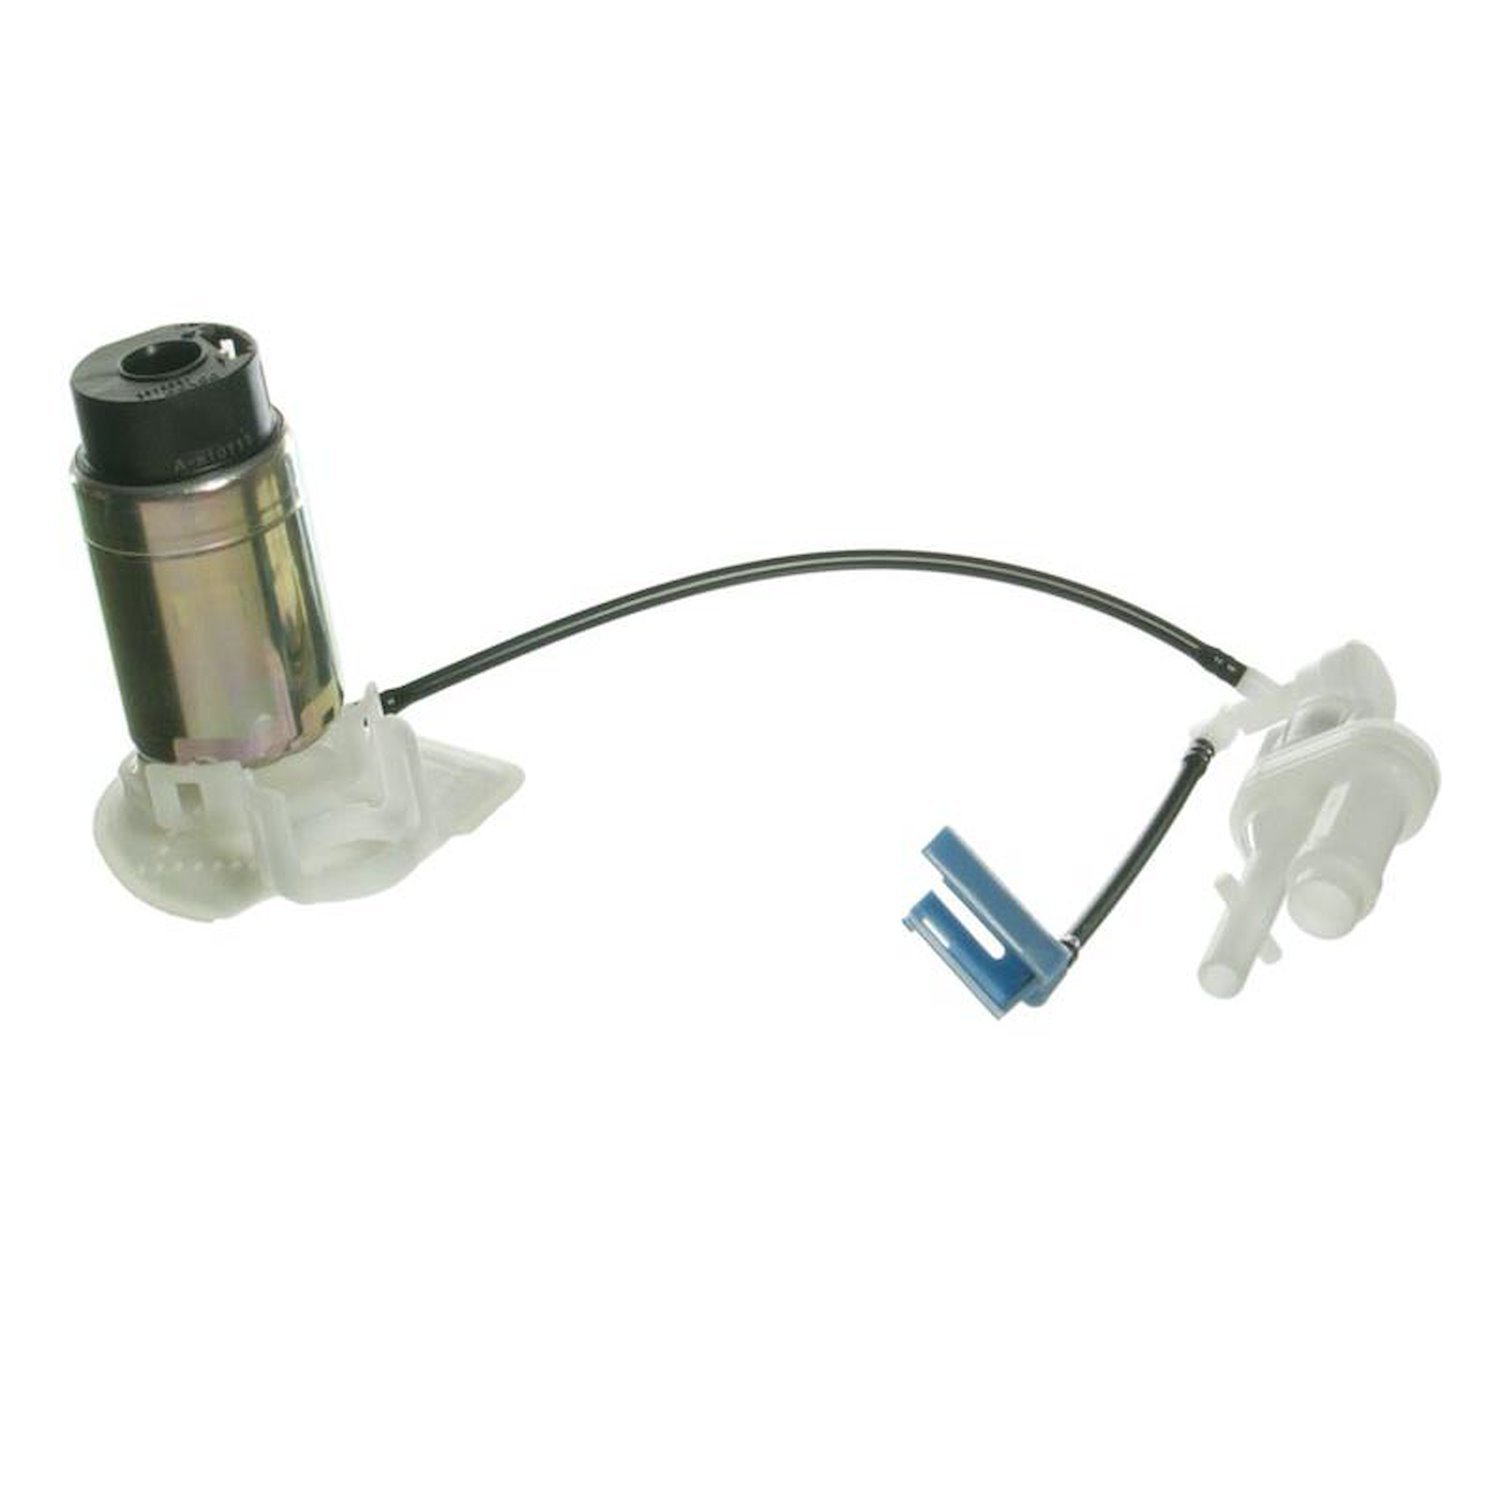 OE Replacement Fuel Pump and Strainer Set for 2006-2008 Toyota RAV4